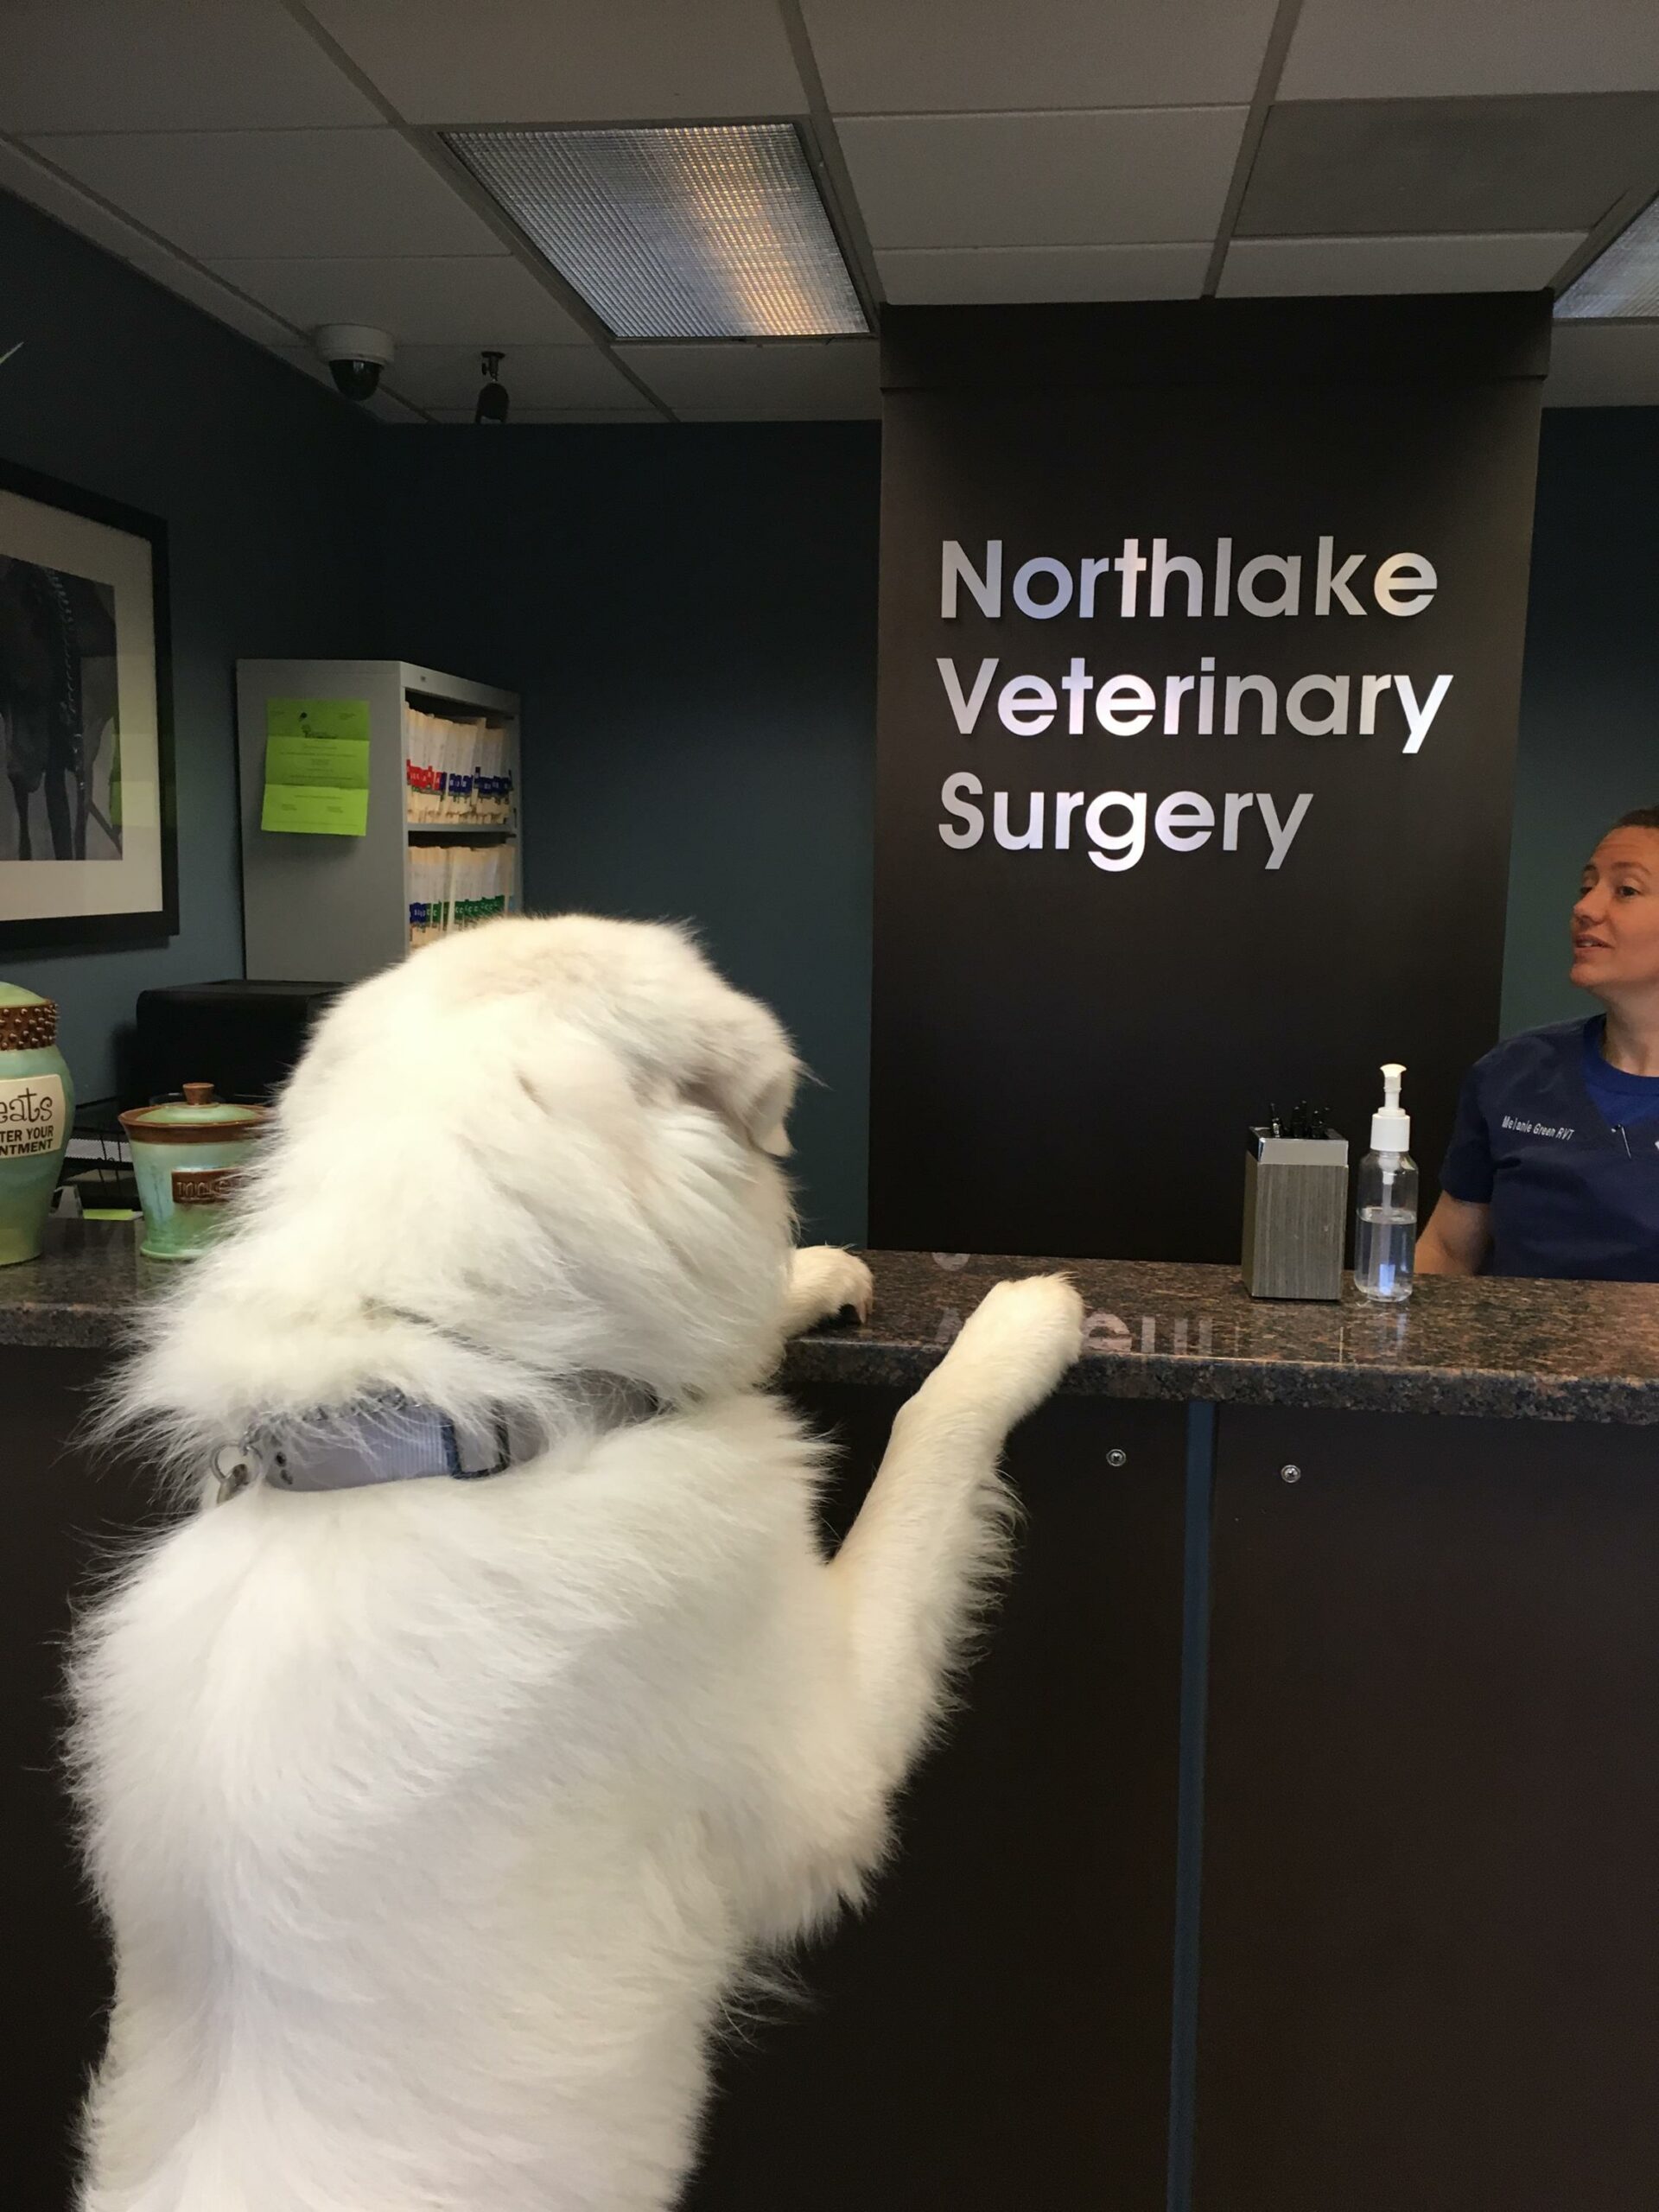 "Hello, I'm here to check in for my neuter." 